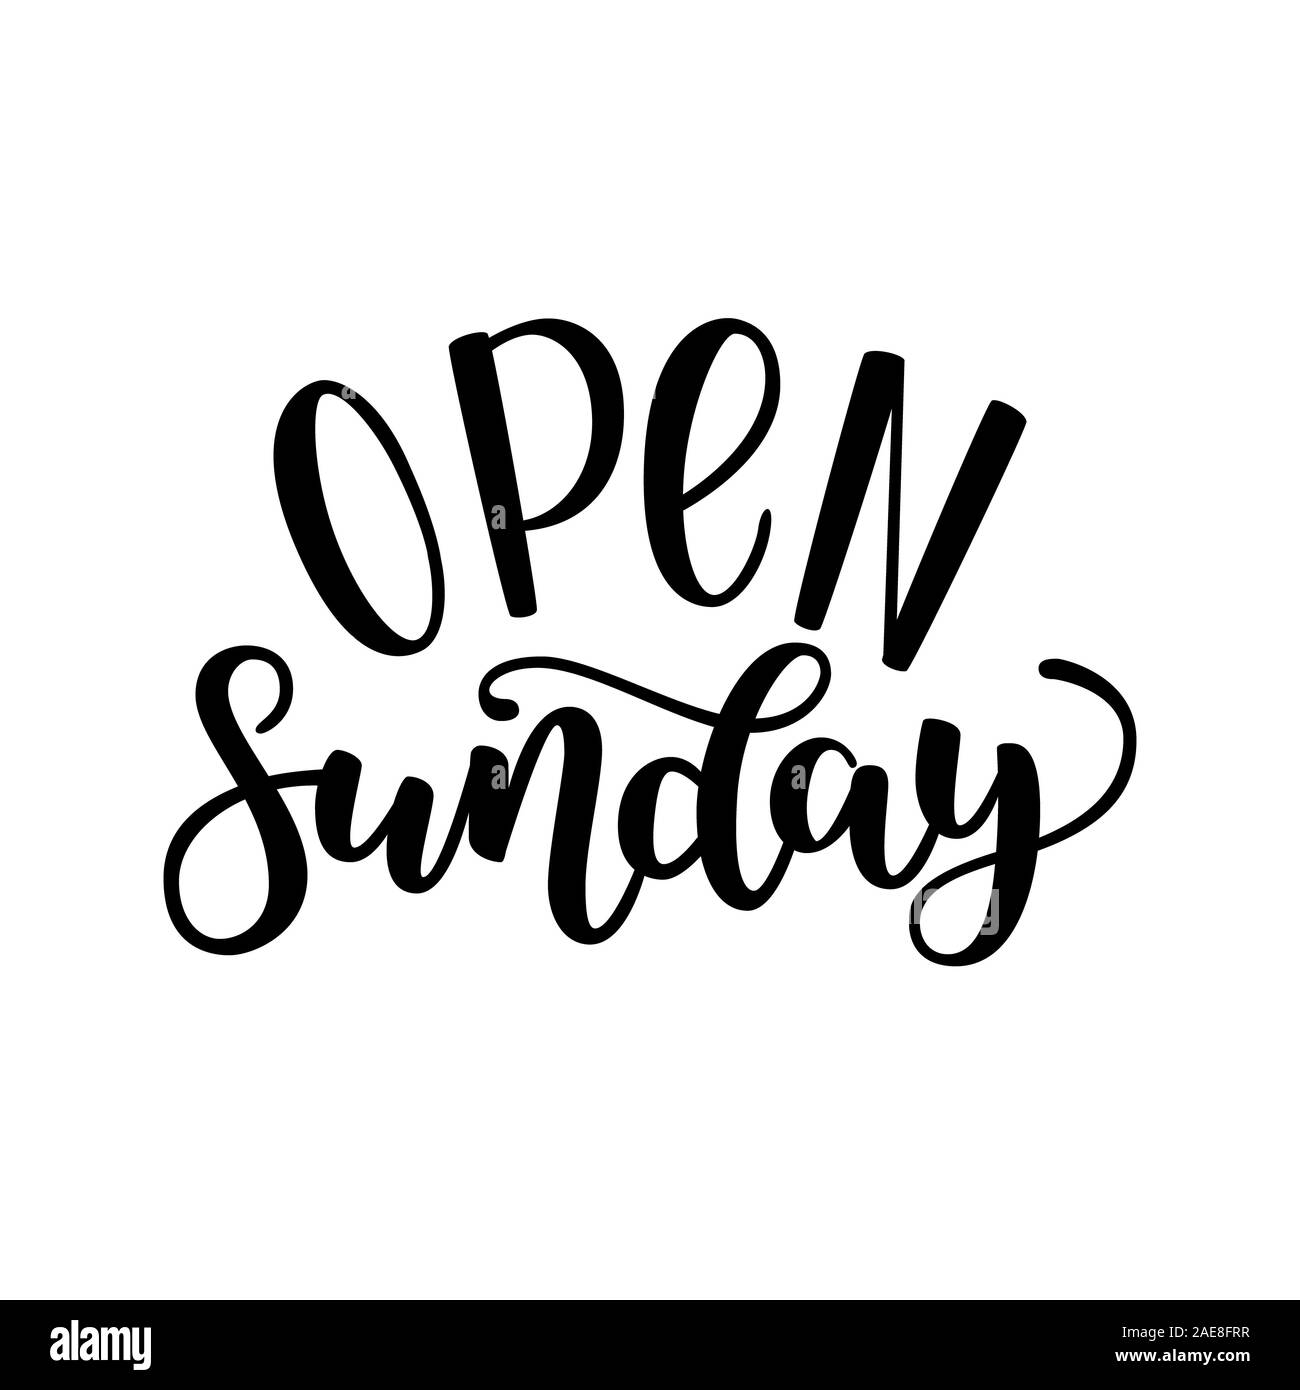 Open sunday handlettering isolated on white background,  illustration. Brush ink lettering. Modern calligraphy for public places, shops and others. Stock Photo